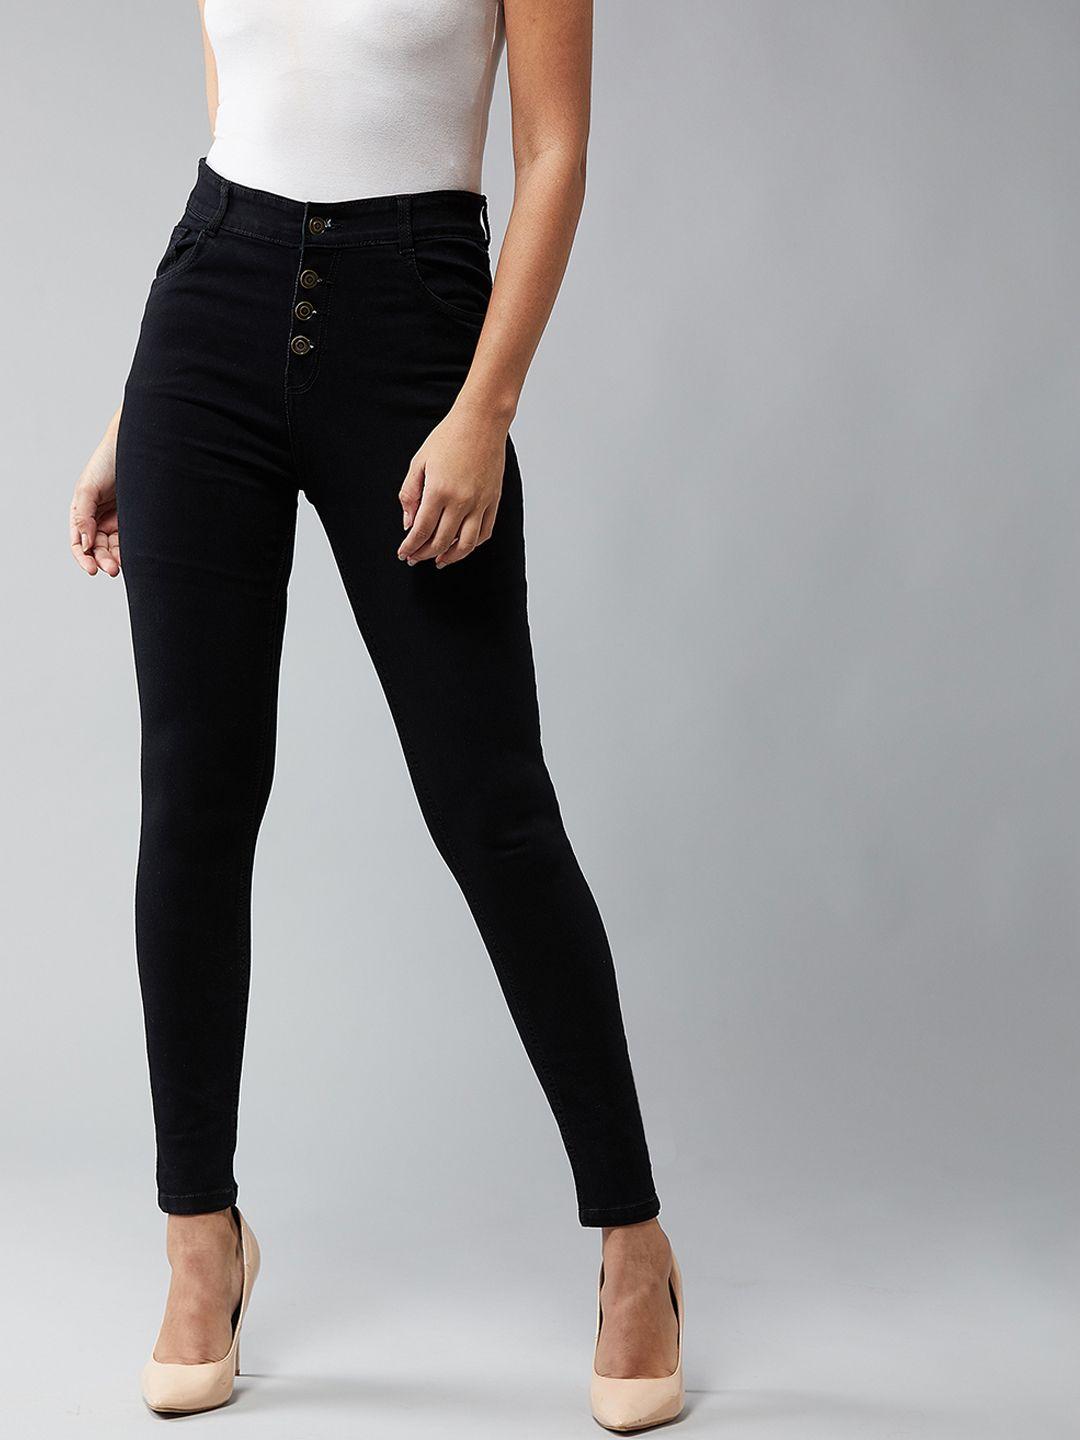 dolce crudo women black skinny fit high-rise clean look stretchable jeans